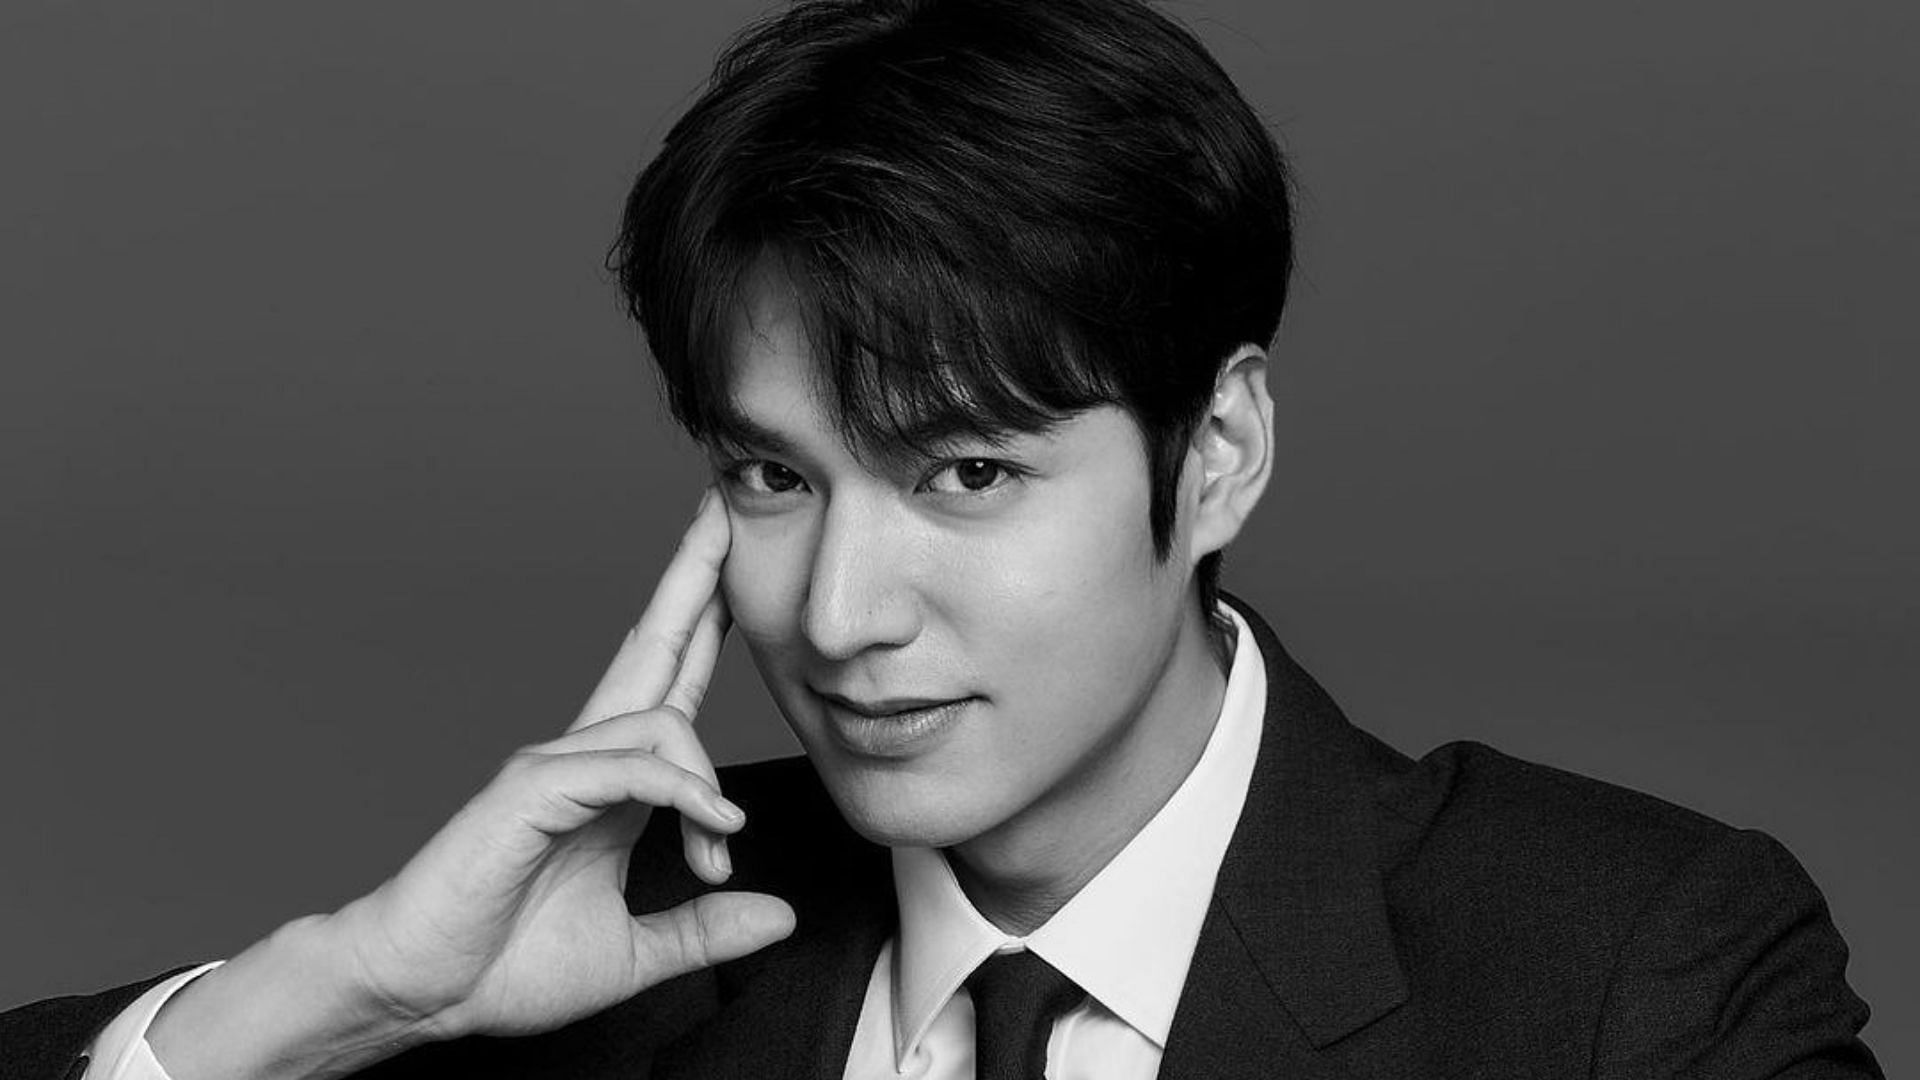 Lee Min Ho in a black and white picture (Image via Instagram/@actorleeminho)